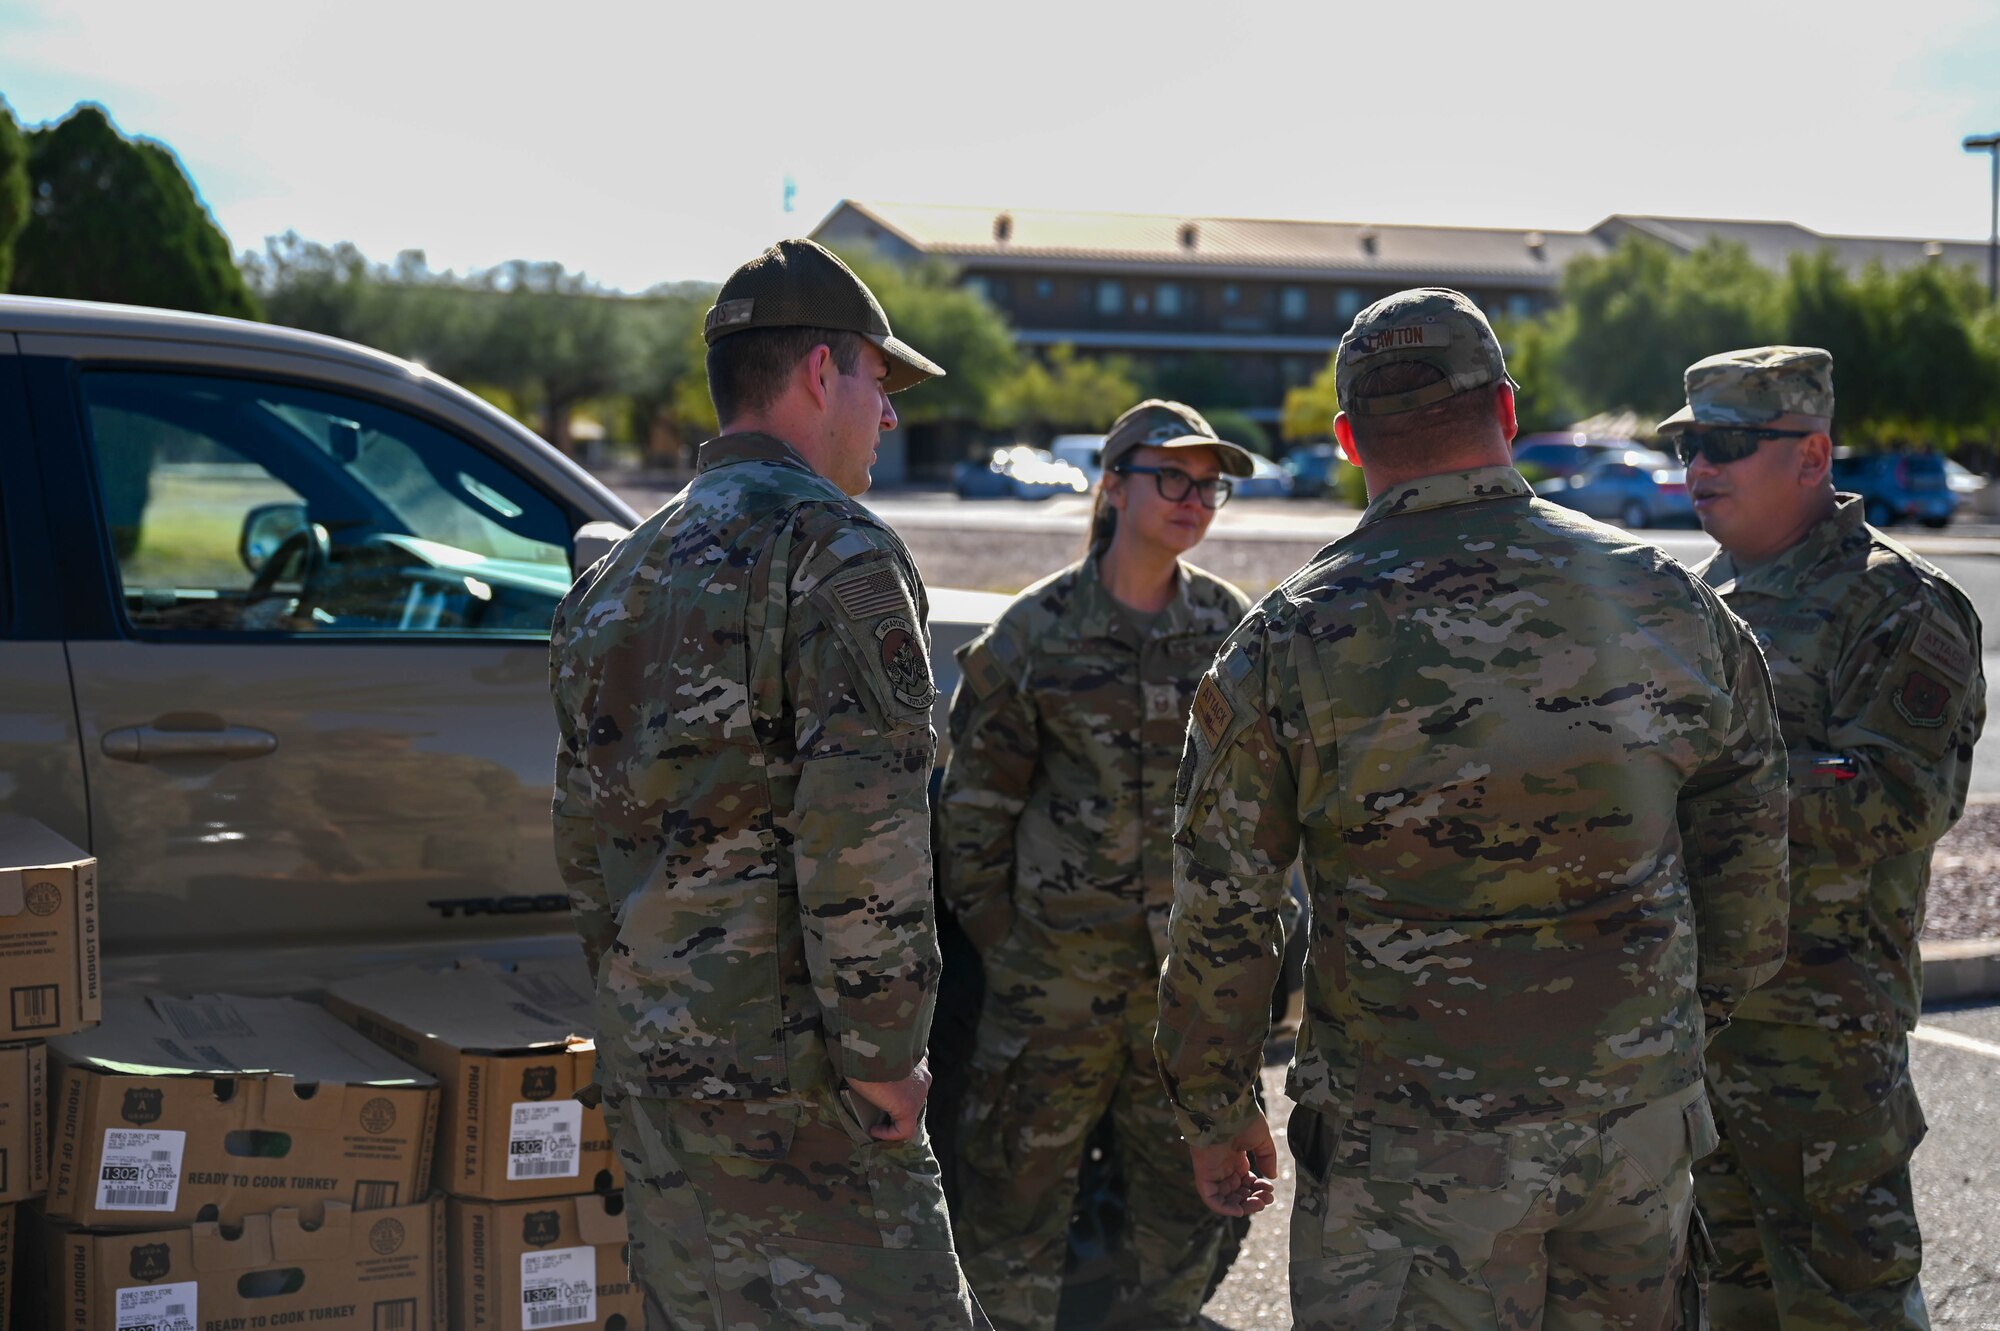 A photo of military members distributing turkeys during a turkey drive.